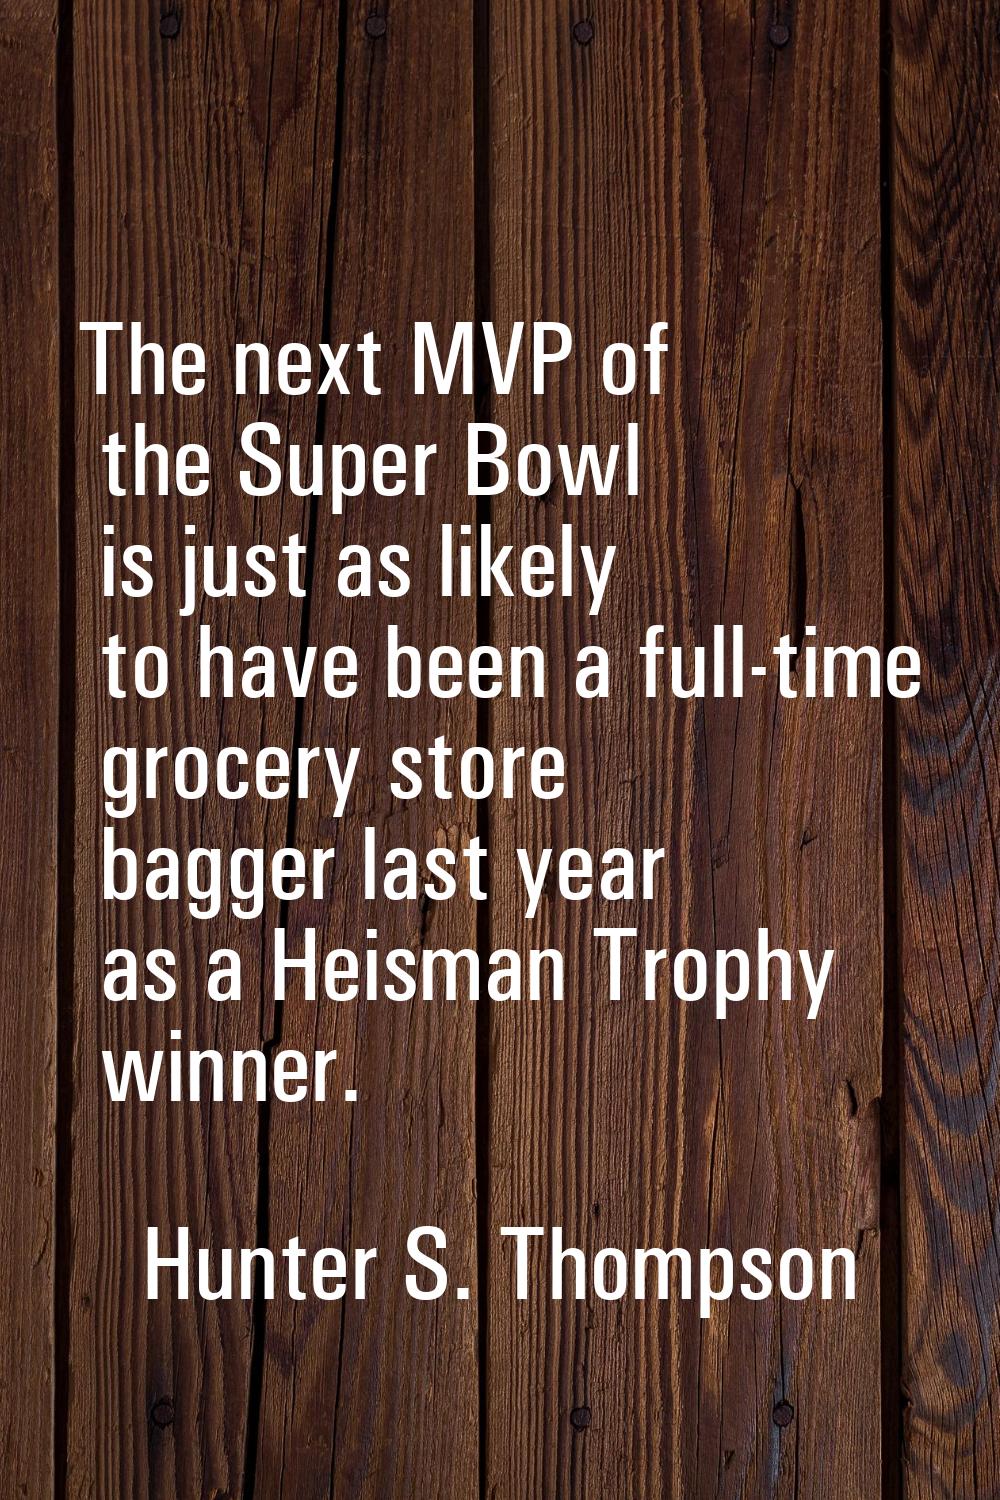 The next MVP of the Super Bowl is just as likely to have been a full-time grocery store bagger last